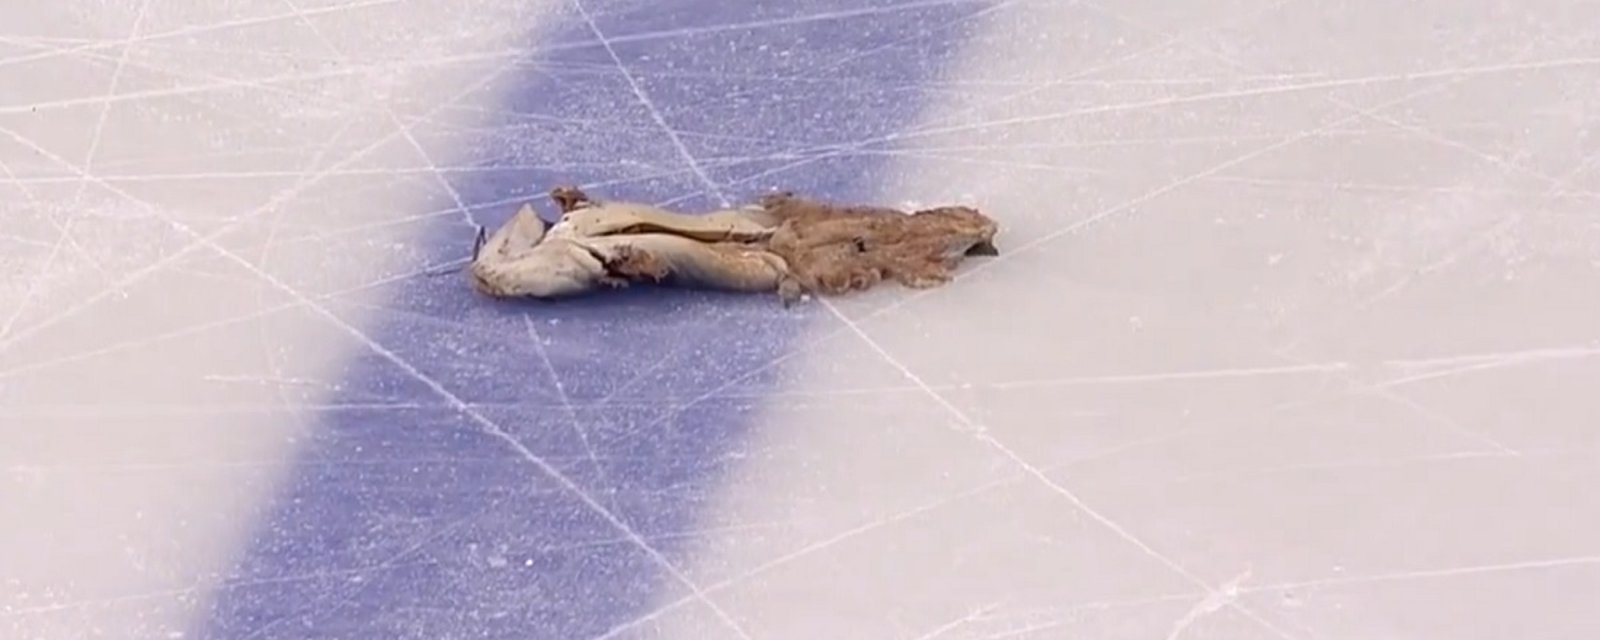 “Dumb Redneck” shares unbelievable story of how he got catfish on the ice last night.